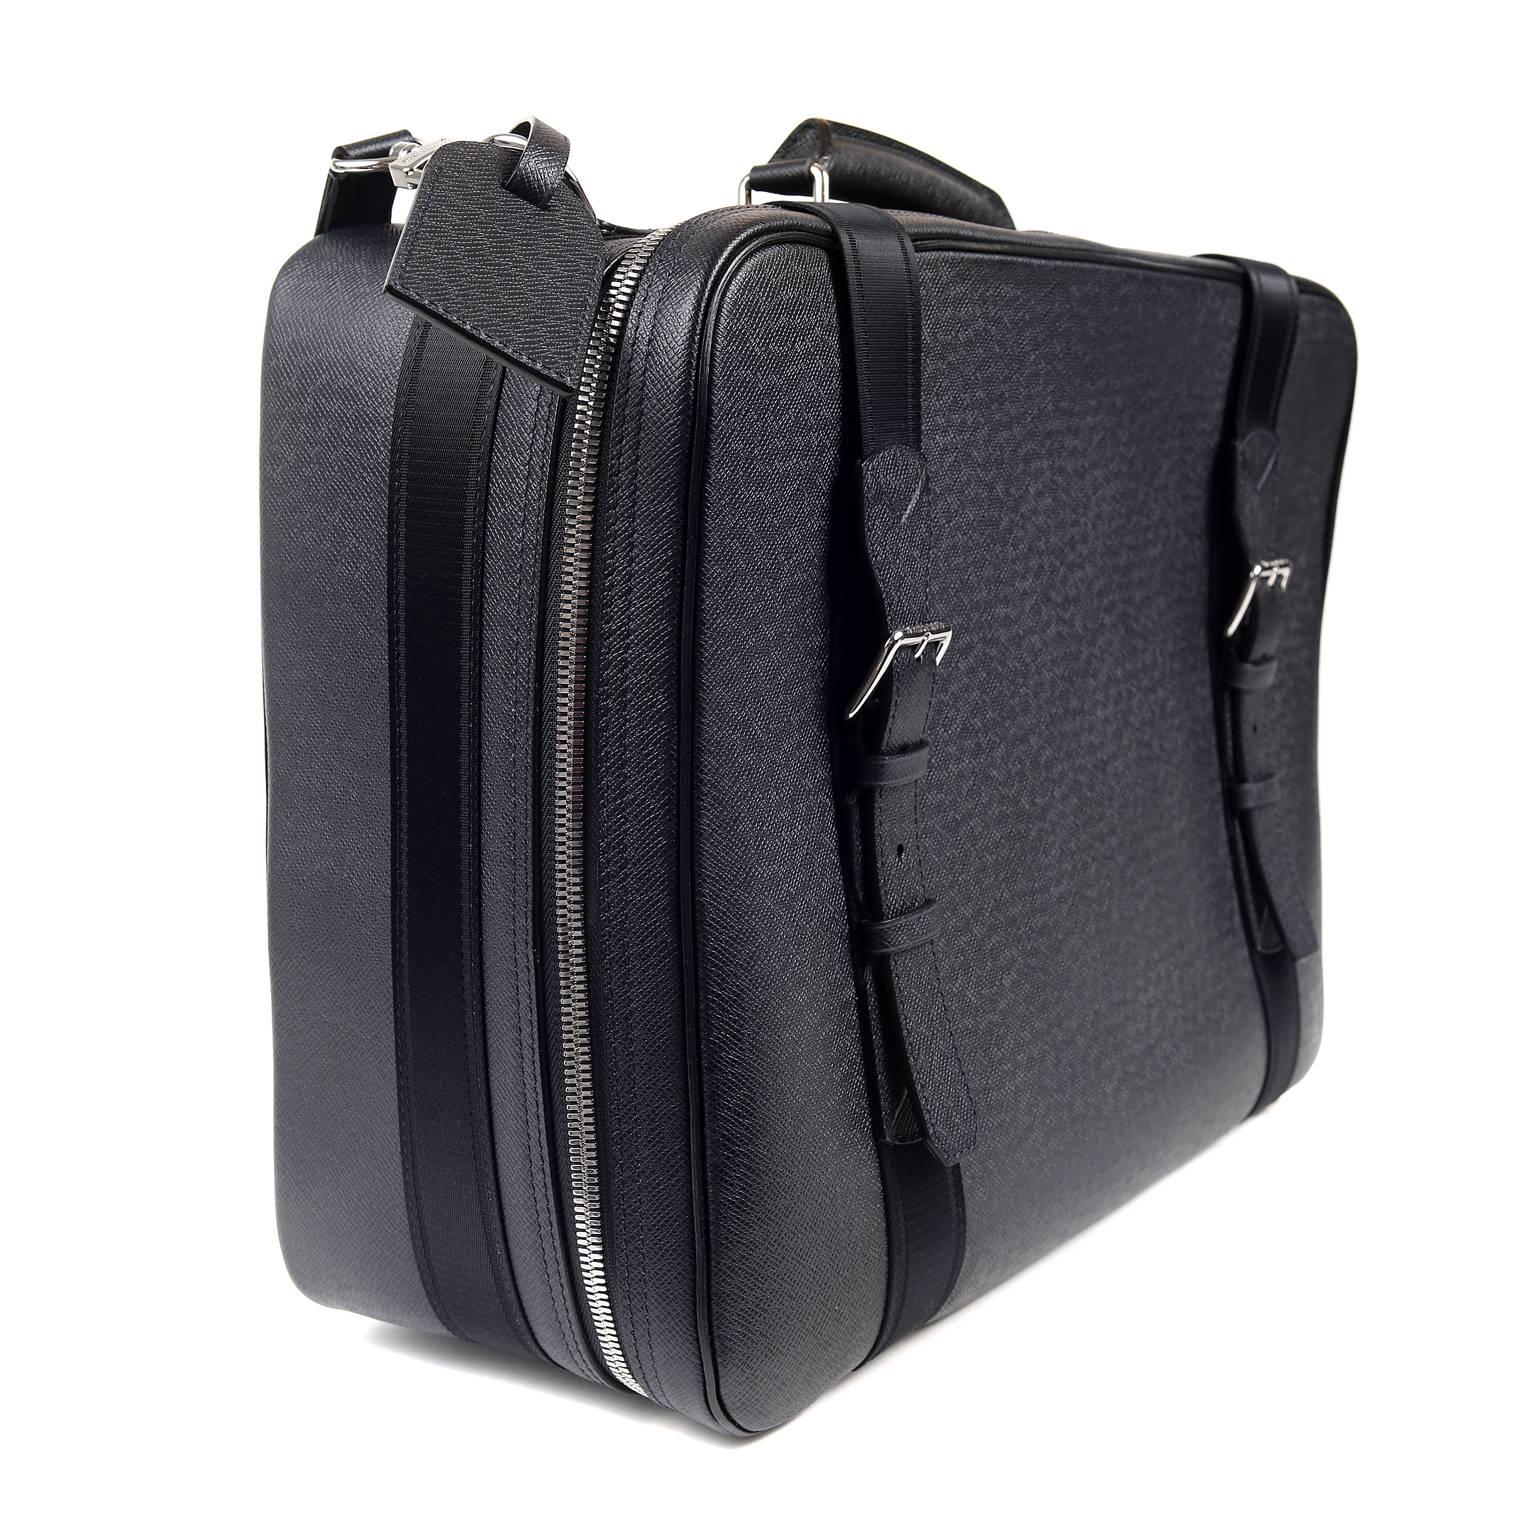 Louis Vuitton Navy Taiga Leather Belted Luggage- NEW
 Perfect for quick getaways or as a carry on, this piece is a great find. 

Dark navy blue Taiga leather is textured and extremely durable.  Silver tone protective footed bottom and two-way zip